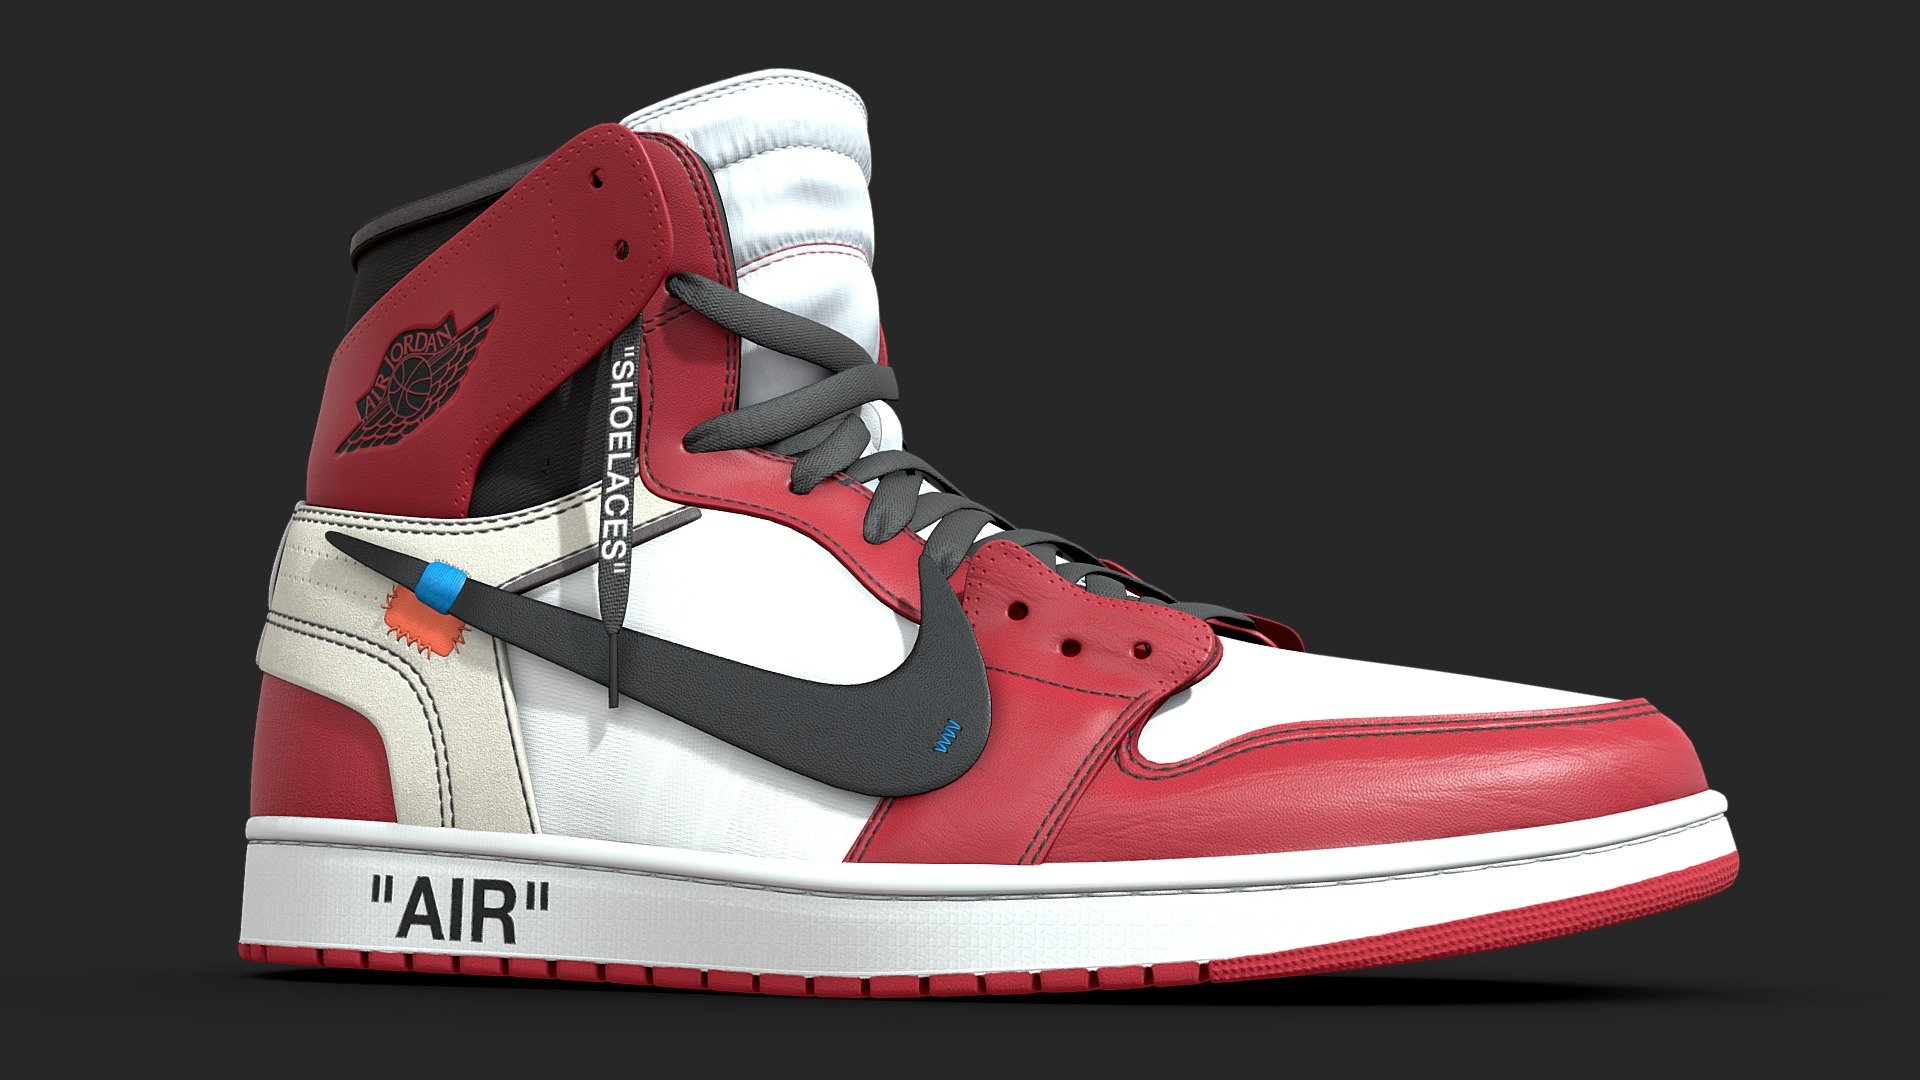 One of the most hyped sneakers of 2017. The Air Jordan 1 x Off White features a half finished, in construction type of look, with exposed foam and hastily stitched on swoosh. 

Modelled in Blender and textured in Substance, no detail went overlooked in the creation of this shoe. As a result it is subdivision ready. Unwrapped with quality at the forefront, the four texture sets allow the materials to take centre stage. 

What's included
Firstly, two versions of this model. The base version with 4 texture sets per shoe, and a One Mesh version that uses only 1 texture set per shoe. Both models are identical, only how they are unwrapped is different. The two texture sets have 5 maps, namely: Ambient Occlusion, Base Color, Metallic, Normal, and Roughness. All textures are 4096x4096. Meaning the One Mesh version has 4 2048x2048 textures.

Video: https://youtu.be/rJsc5XdW88c - Jordan 1 Off White Chicago - Buy Royalty Free 3D model by Joe-Wall (@joewall) 3d model